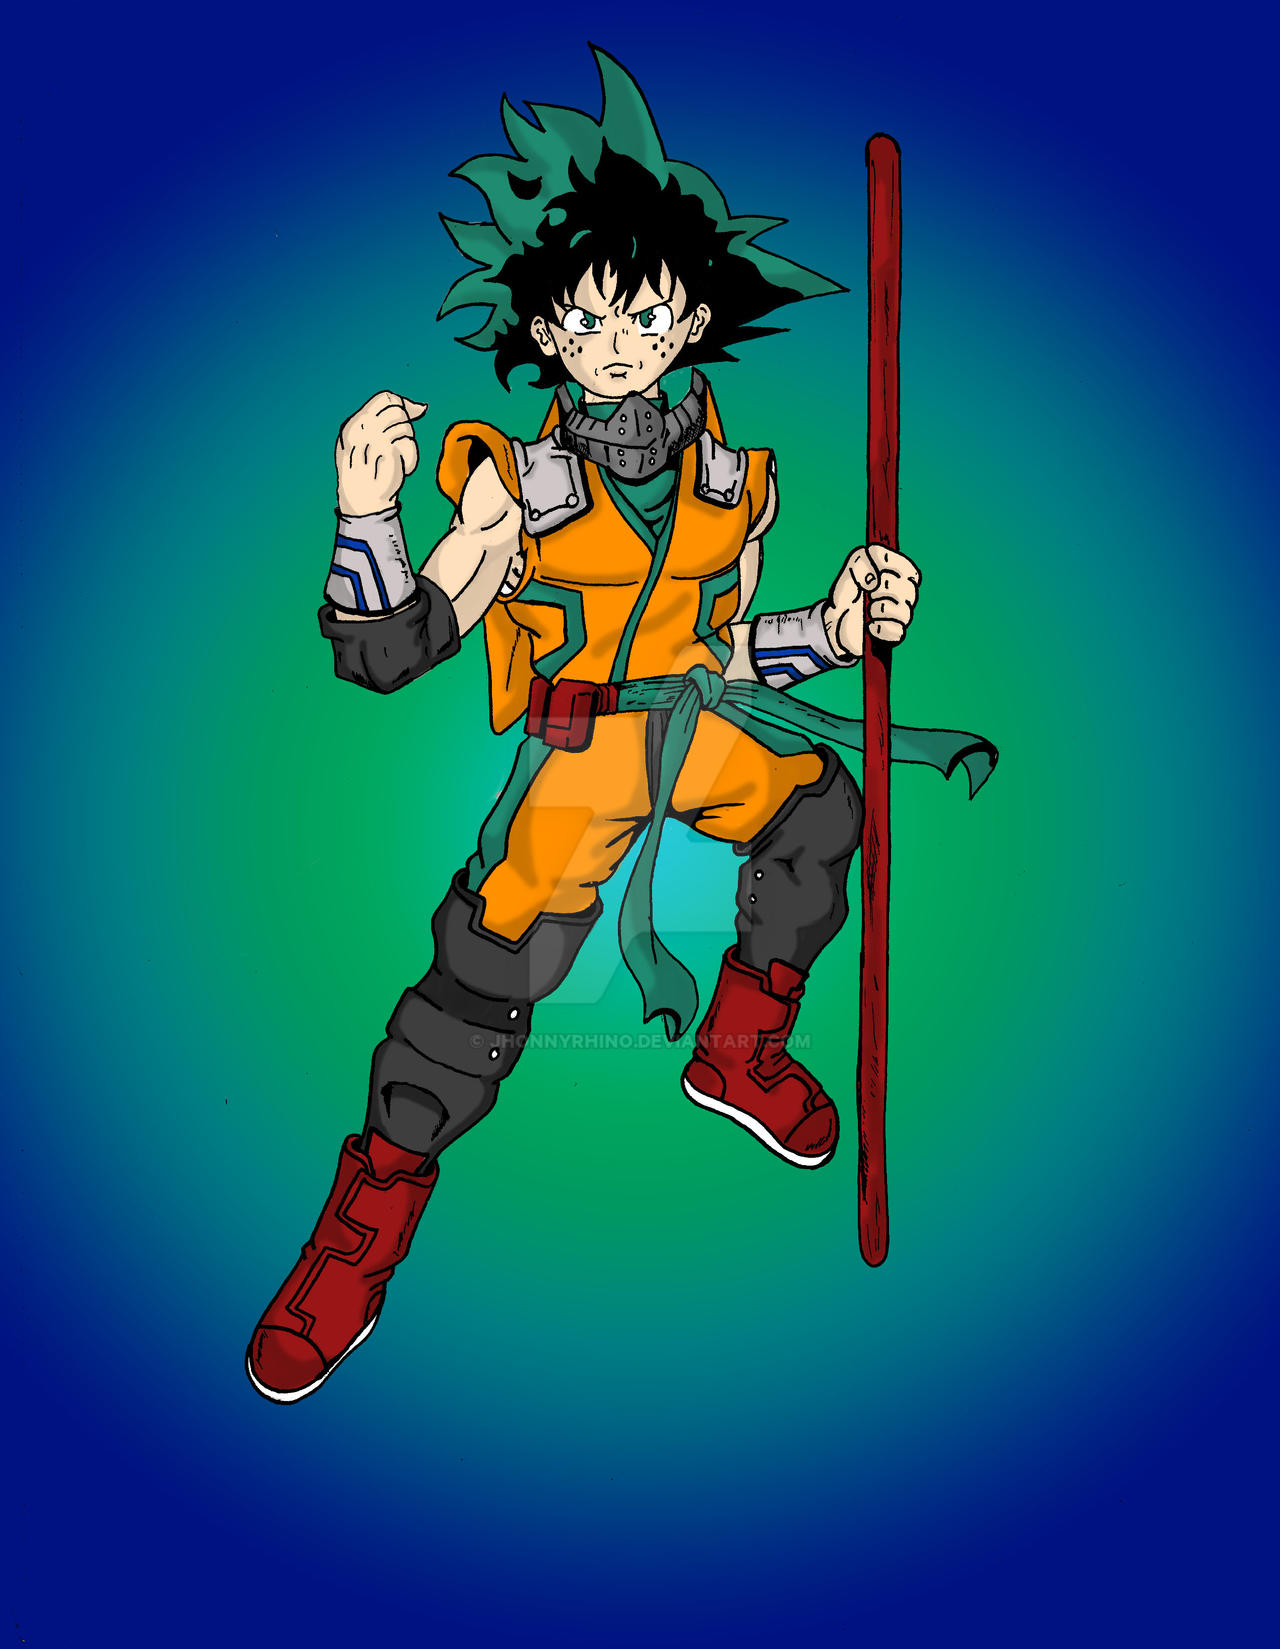 Goku from dbz mixed with deku from my hero academia, painting style, with a  good background